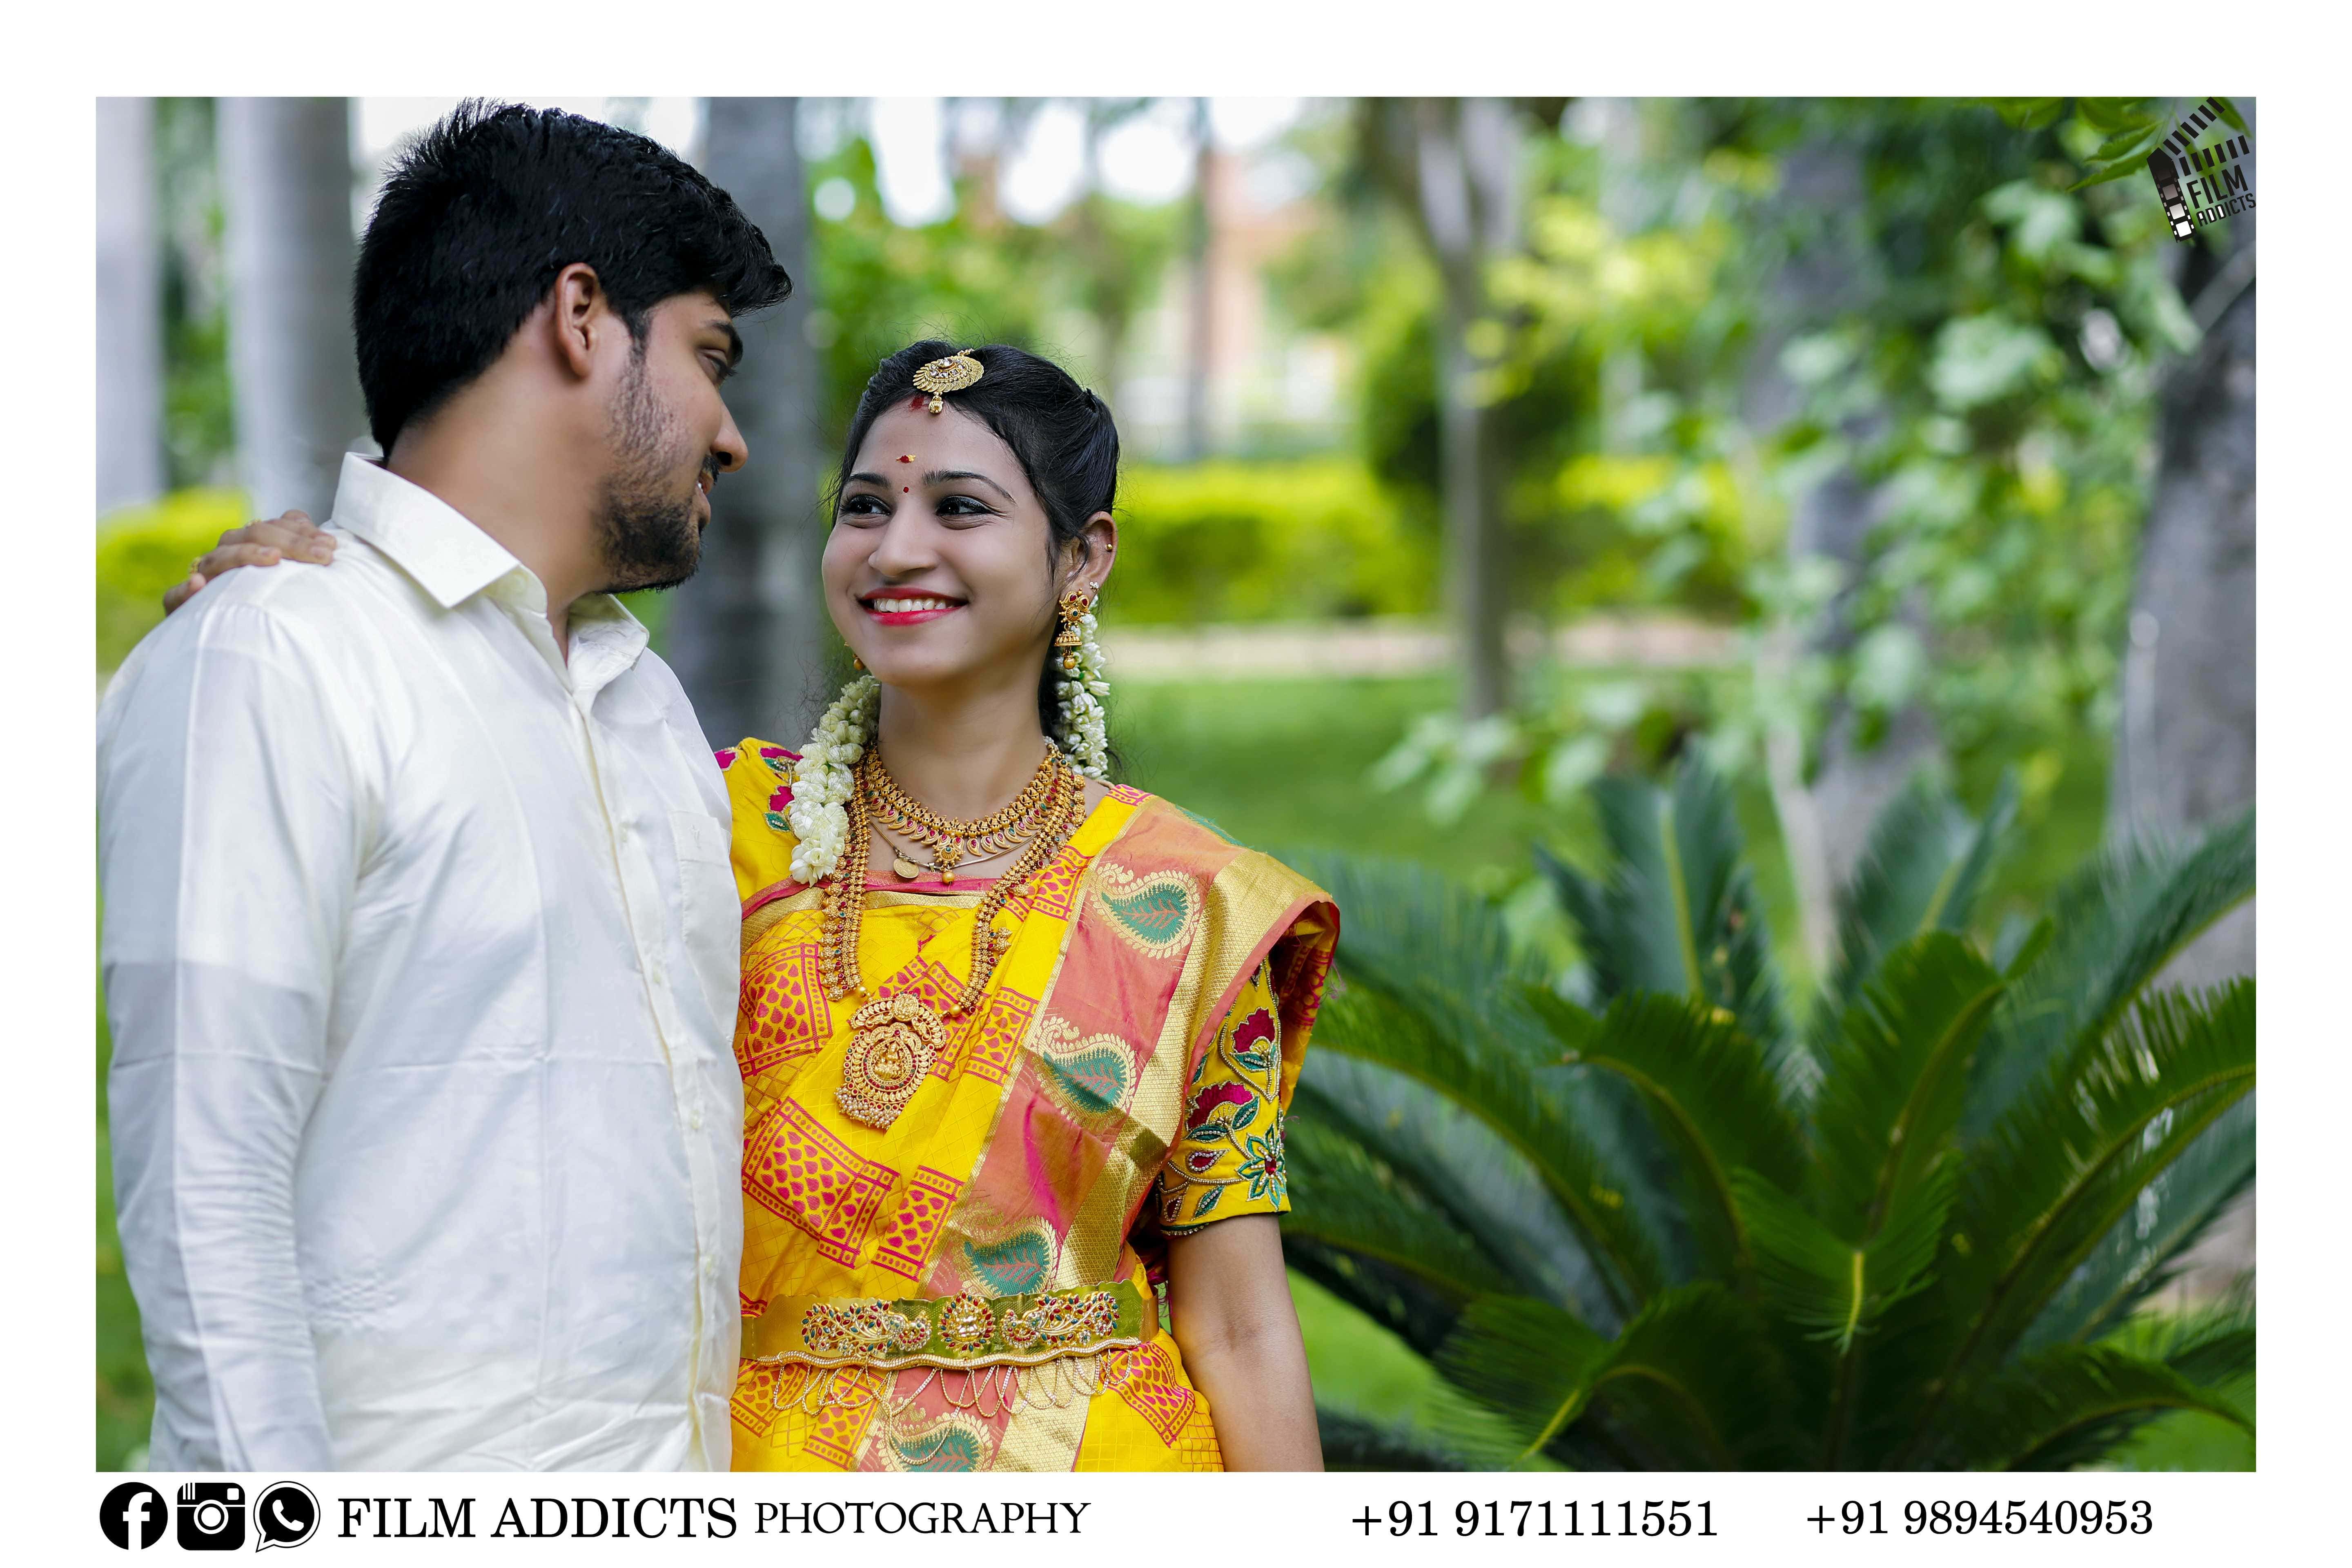 best-candid-photographers-in-theni,Candid-photography-in-theni,best-wedding -photography-in-theni,Best-candid-photography-inb-theni,    Best-candid-photographer,candid-photographer-in-theni,drone-photographer-in-theni,helicam-photographer-in-theni, 
    candid-wedding-photographers-in-theni,photographers-in-theni,professional-wedding-photographers-in-theni,top-wedding-filmmakers-in-theni,wedding-cinematographers-in-theni,wedding-cinimatography-in-theni,wedding-photographers-in-theni,
    wedding-teaser-in-theni, asian-wedding-photography-in-theni, best-candid-photographers-in-theni, best-candid-videographers-in-theni,  
    best-photographers-in-theni best-wedding-photographers-in-theni, 
    best-nadar-wedding-photography-in-theni candid-photographers-in-theni destination-wedding-photographers-in-theni,
    fashion-photographers-in-theni, theni-famous-stage-decorations